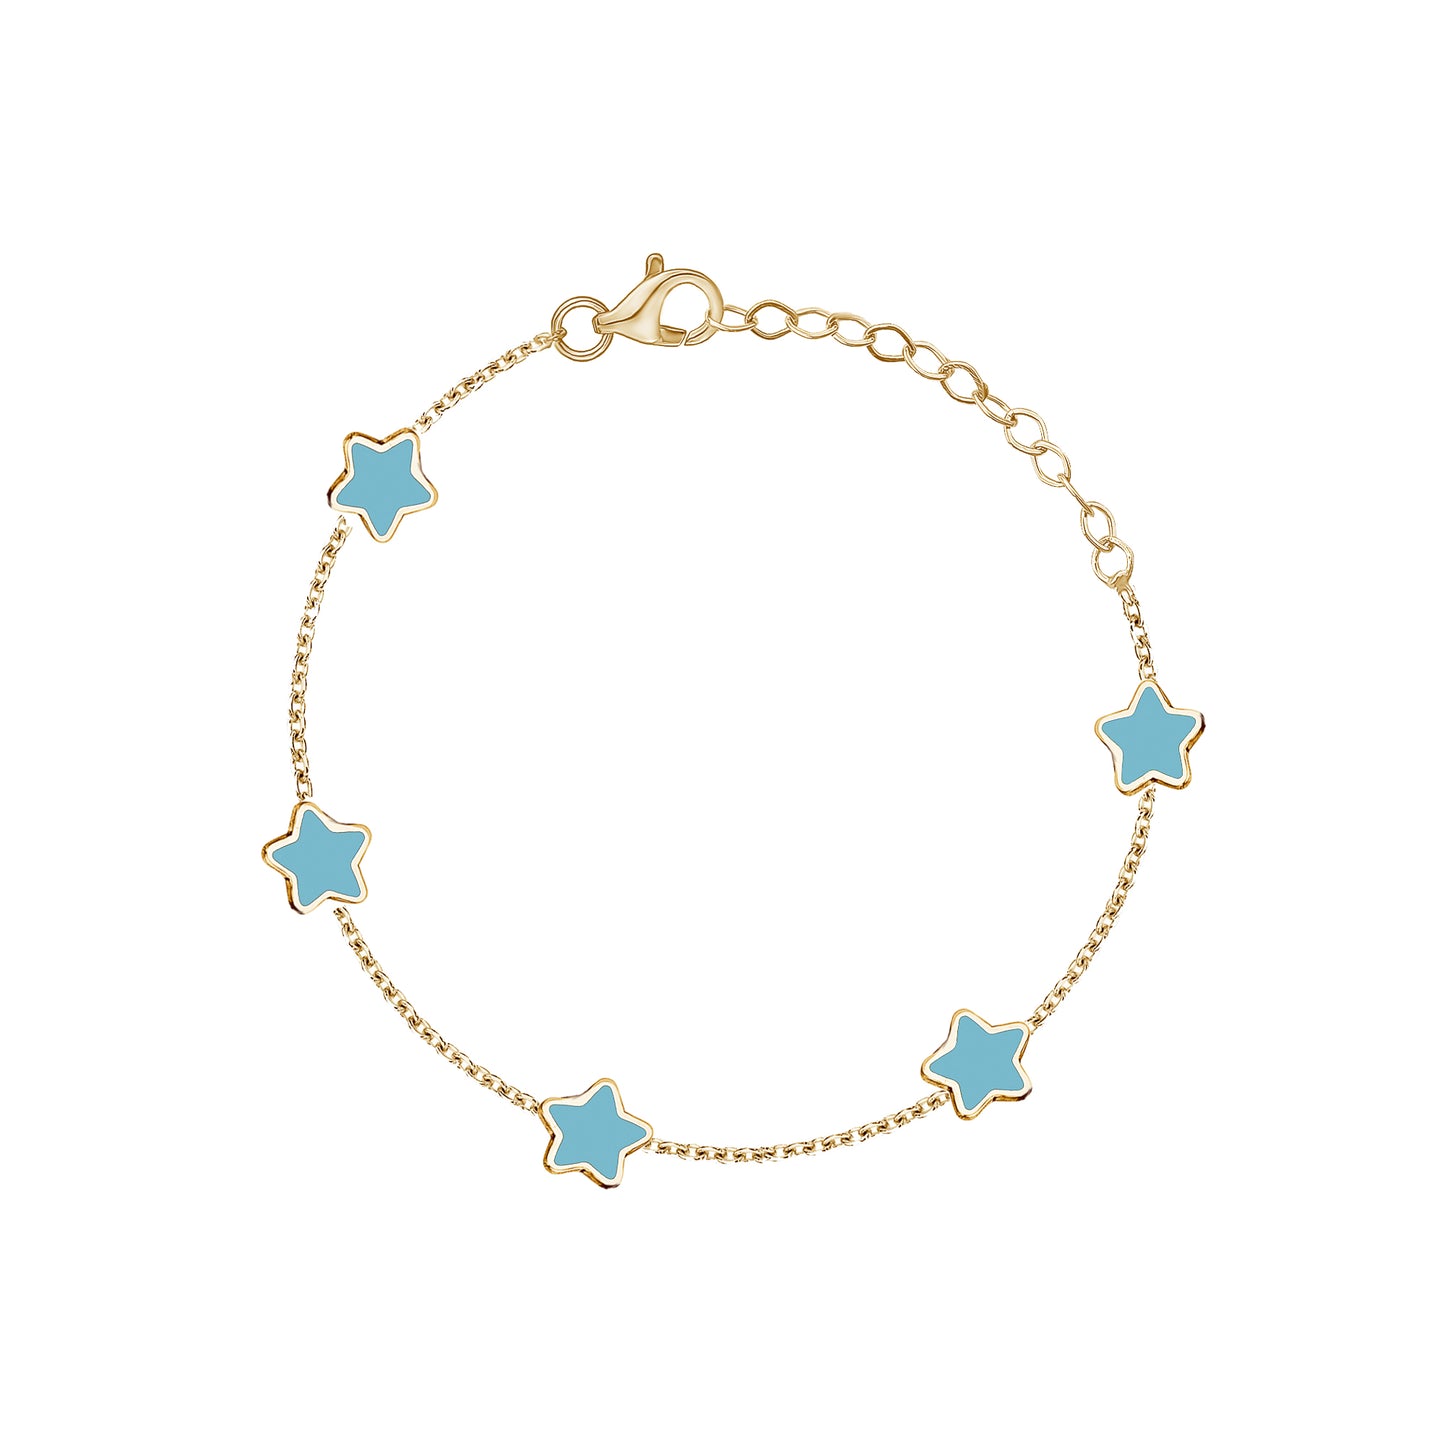 Small Colored Stone Star Bracelet 6.5" - 7"